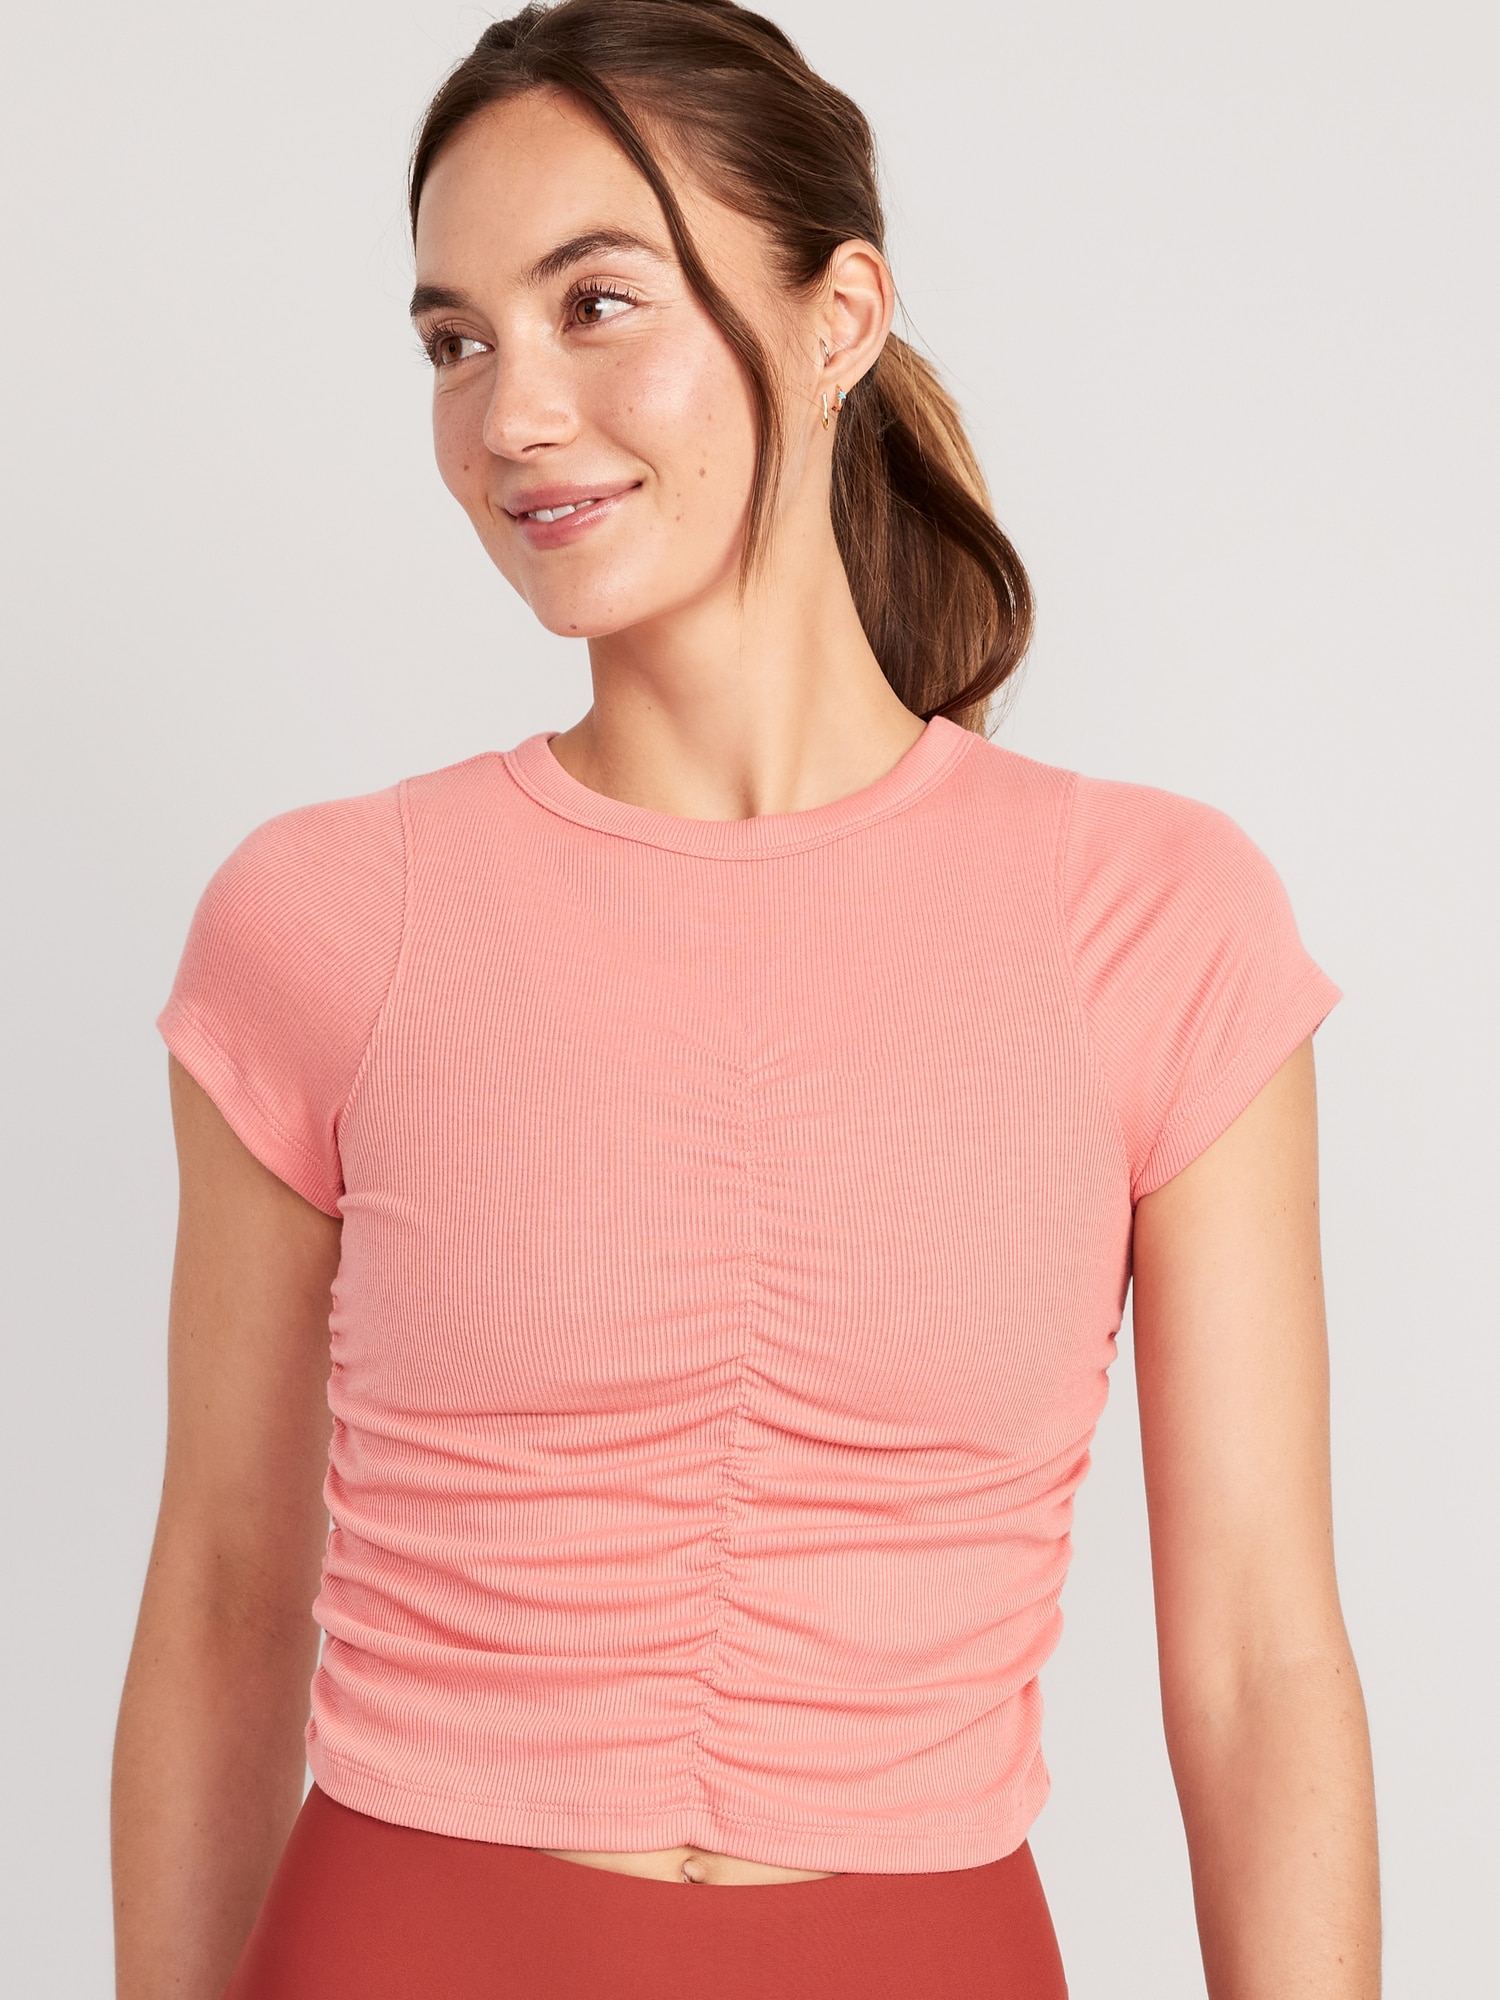 Old Navy UltraLite Rib-Knit Ruched T-Shirt for Women pink. 1